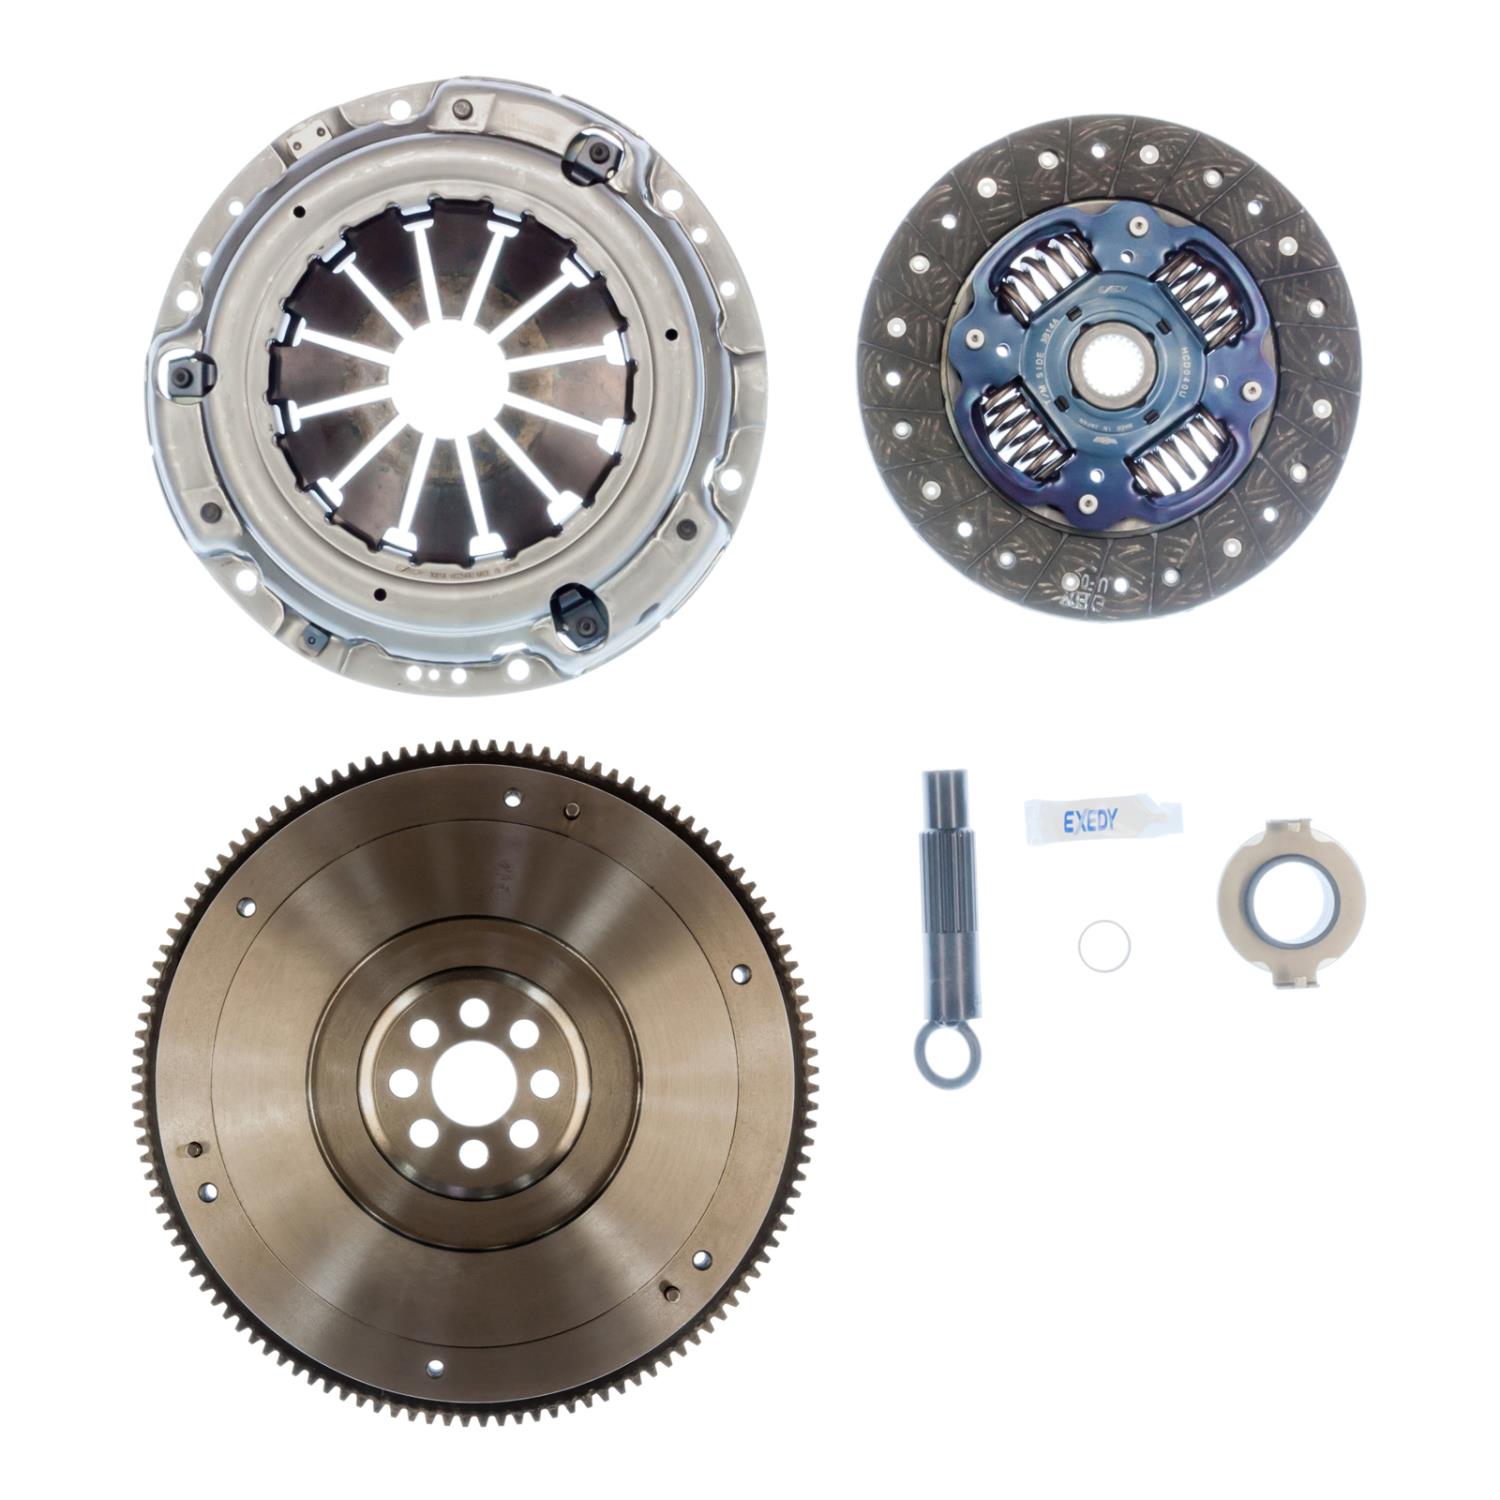 HCK1001 OEM Replacement Transmission Clutch and Flywheel Kit, 2004-2008 Acura TSX L4